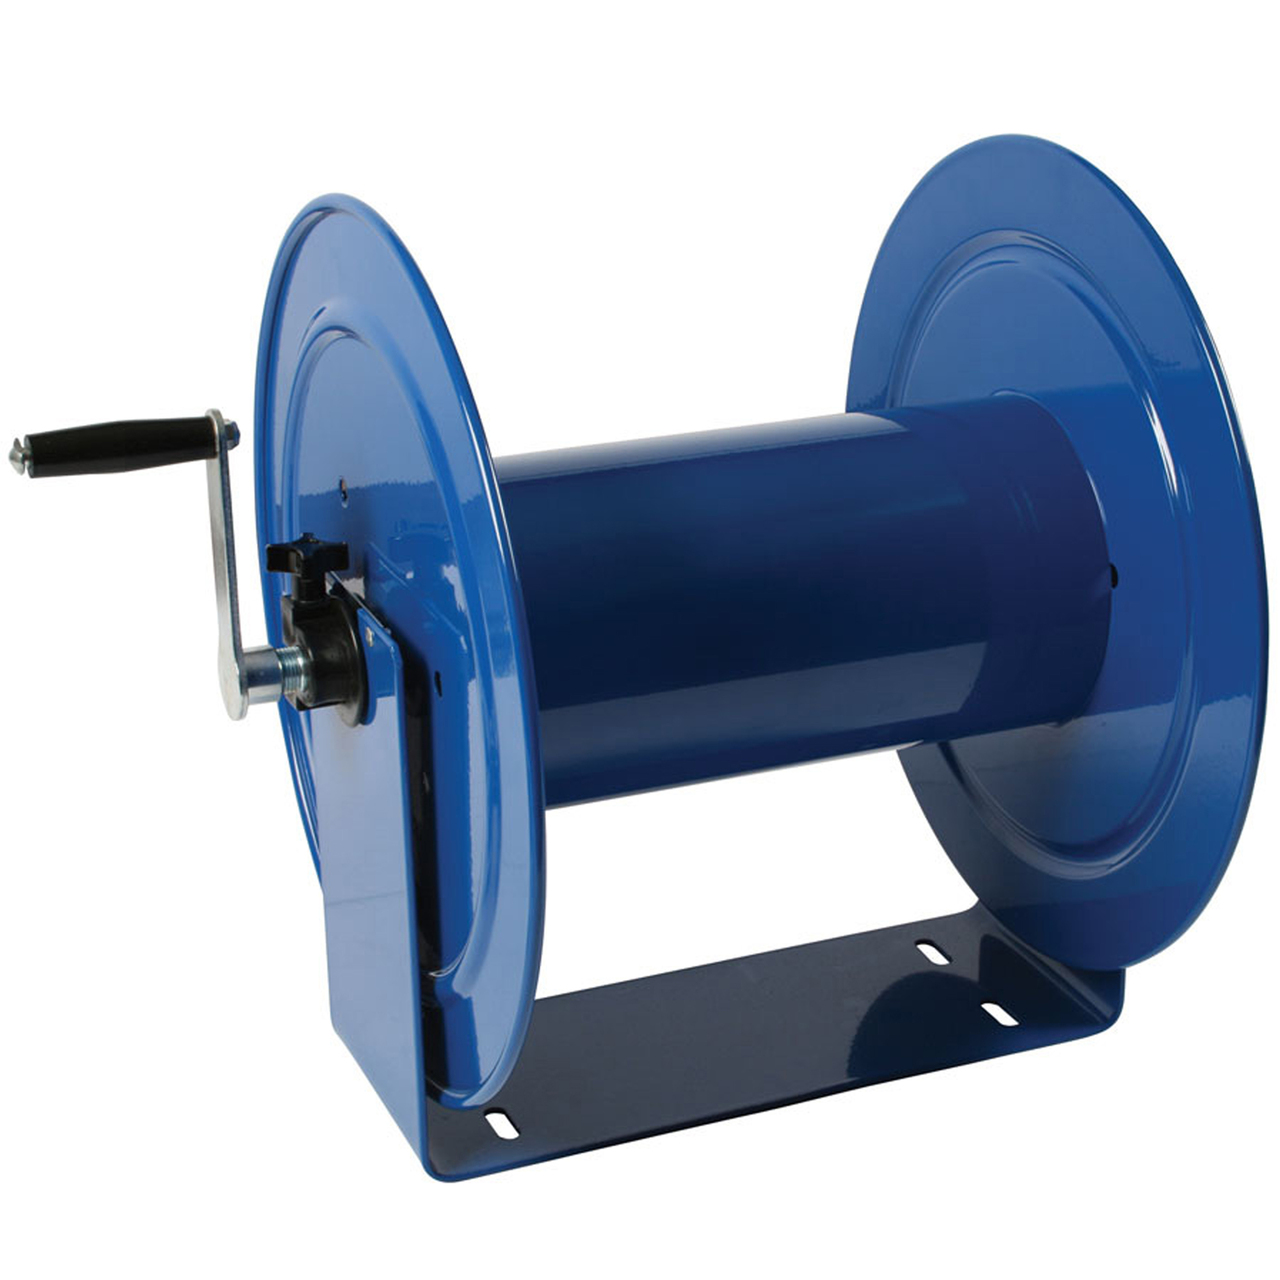 Heavy Duty Stainless Steel Vacuum Hose Reel - Central Technology Systems